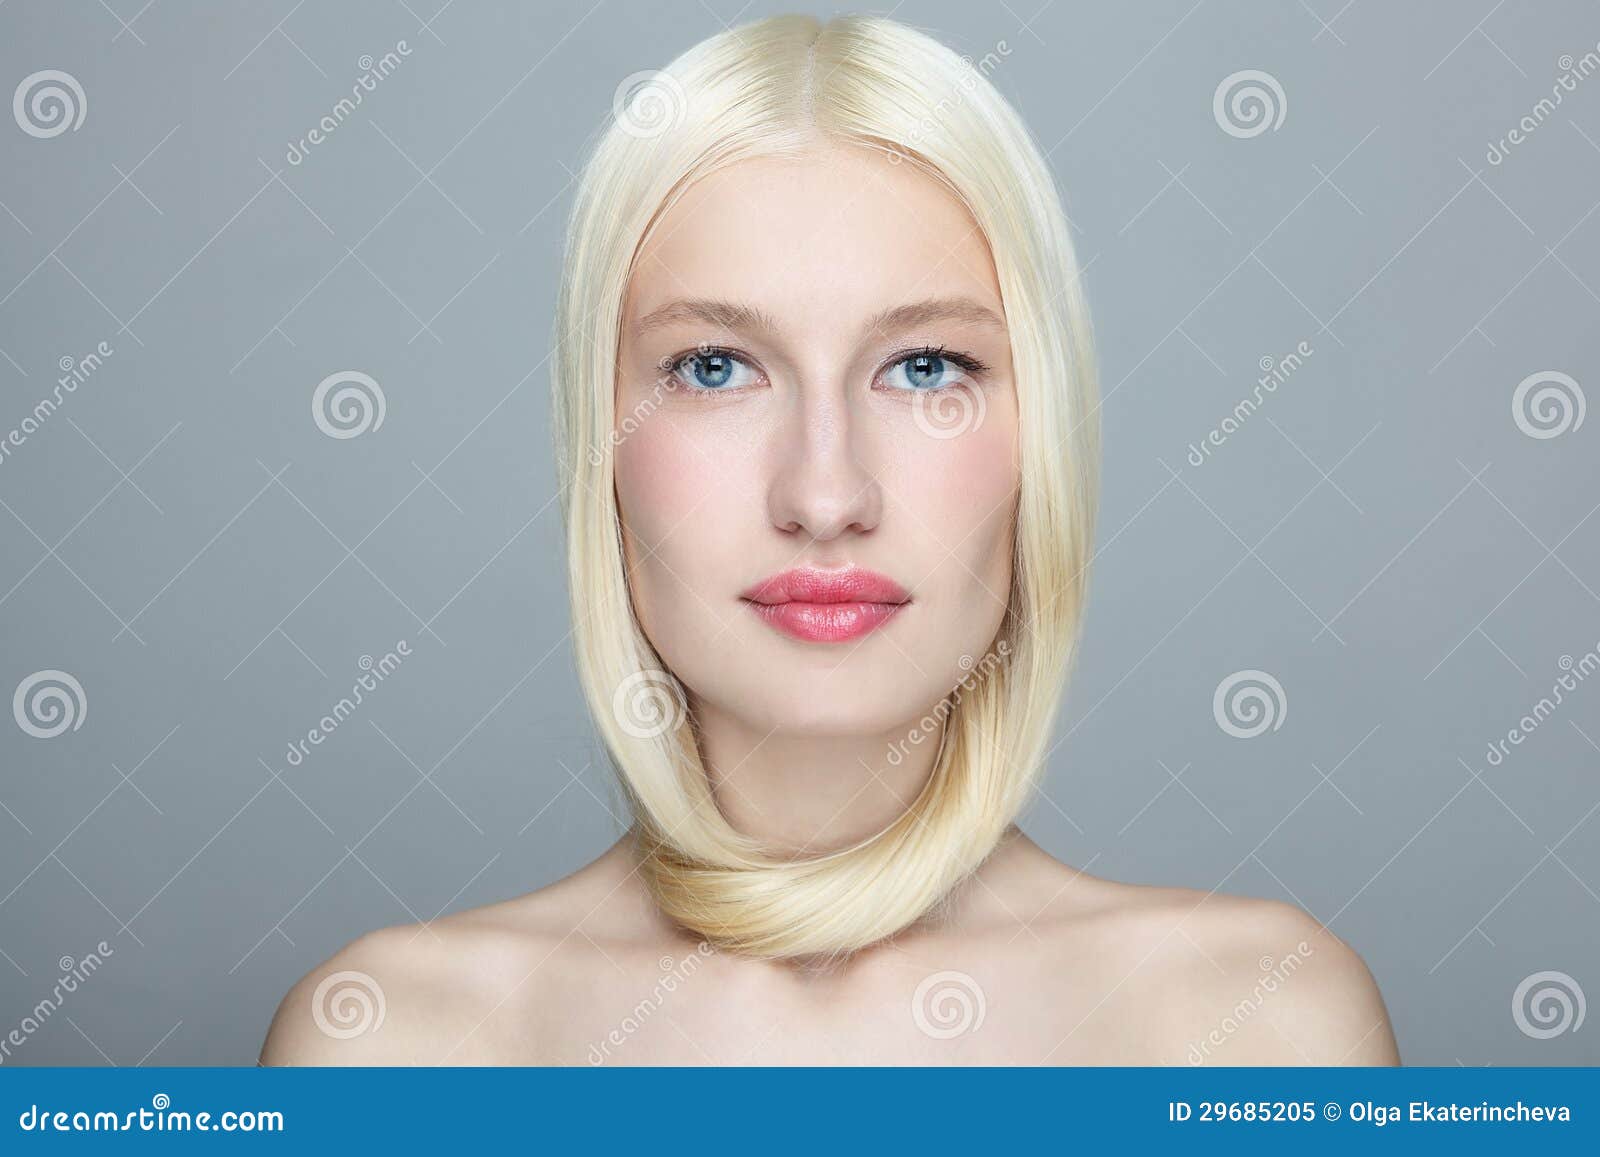 Free Images of Blond Hair - wide 5